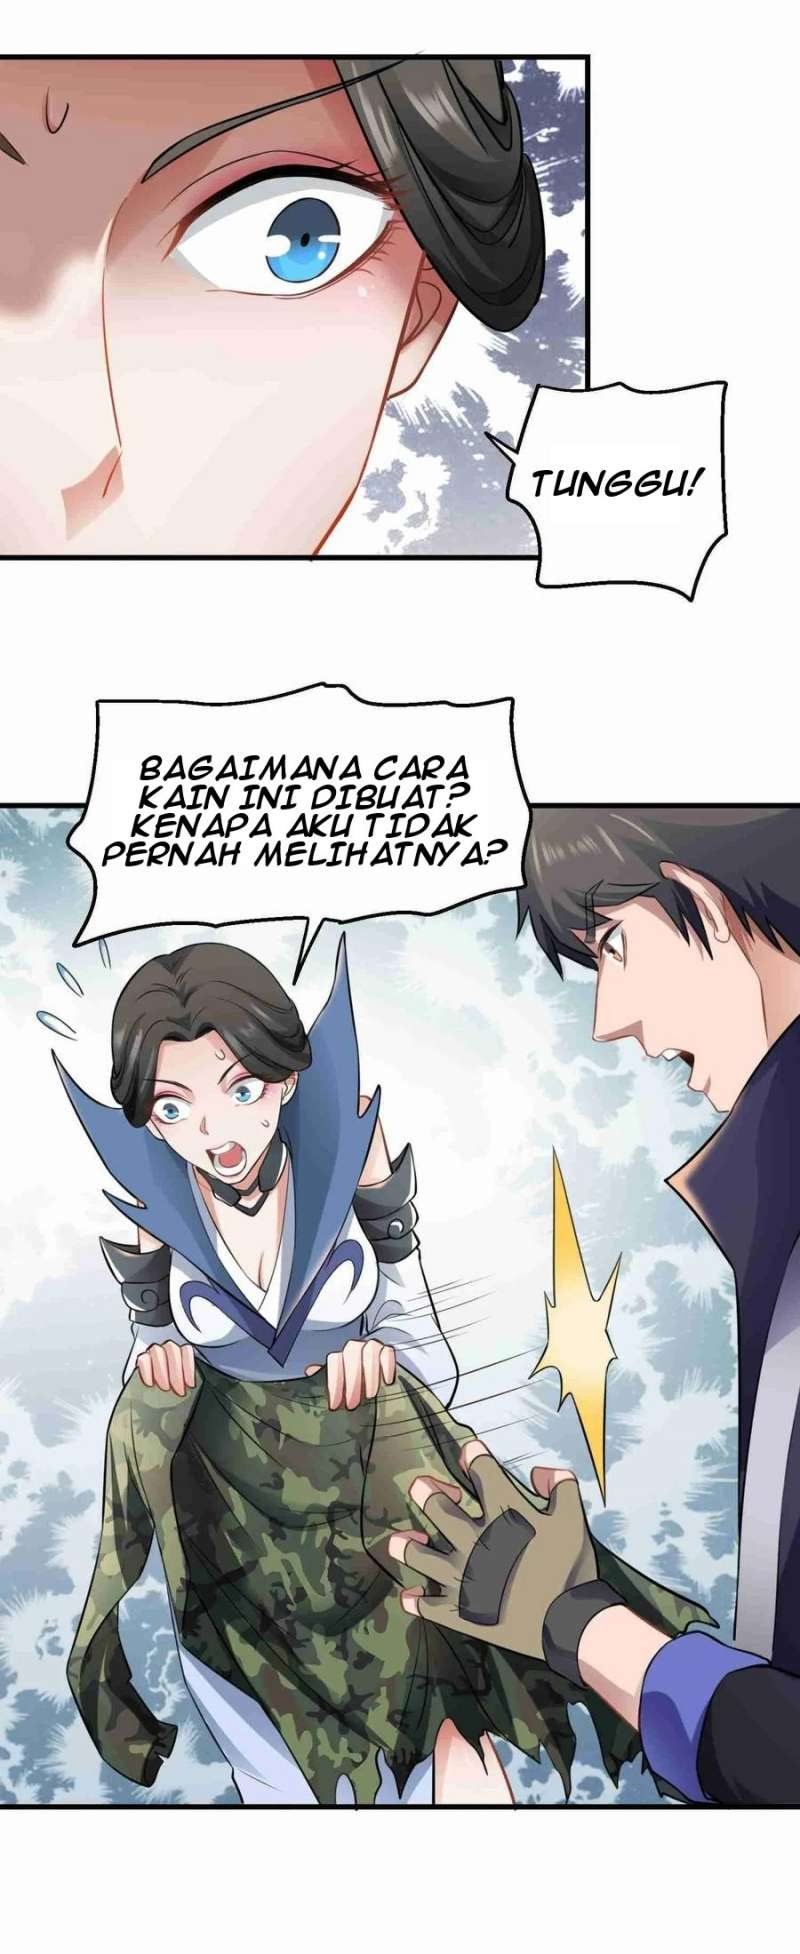 First Dragon Chapter 66